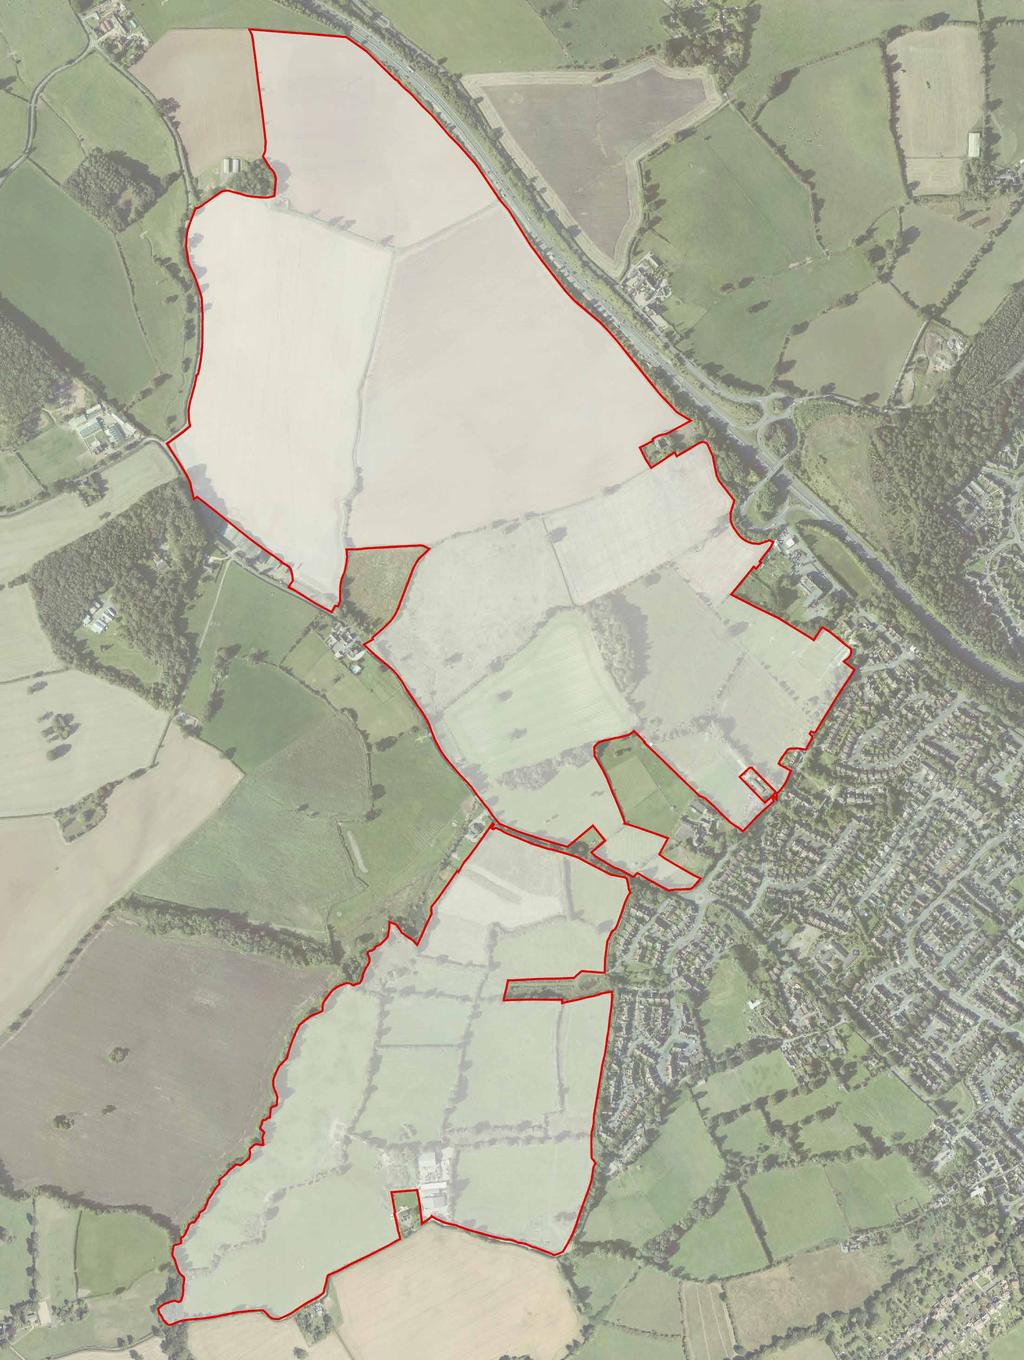 WELCOME The developers are preparing an outline planning application for a residential led development and need the community s views in order to develop the proposals further WHAT IS PROPOSED?